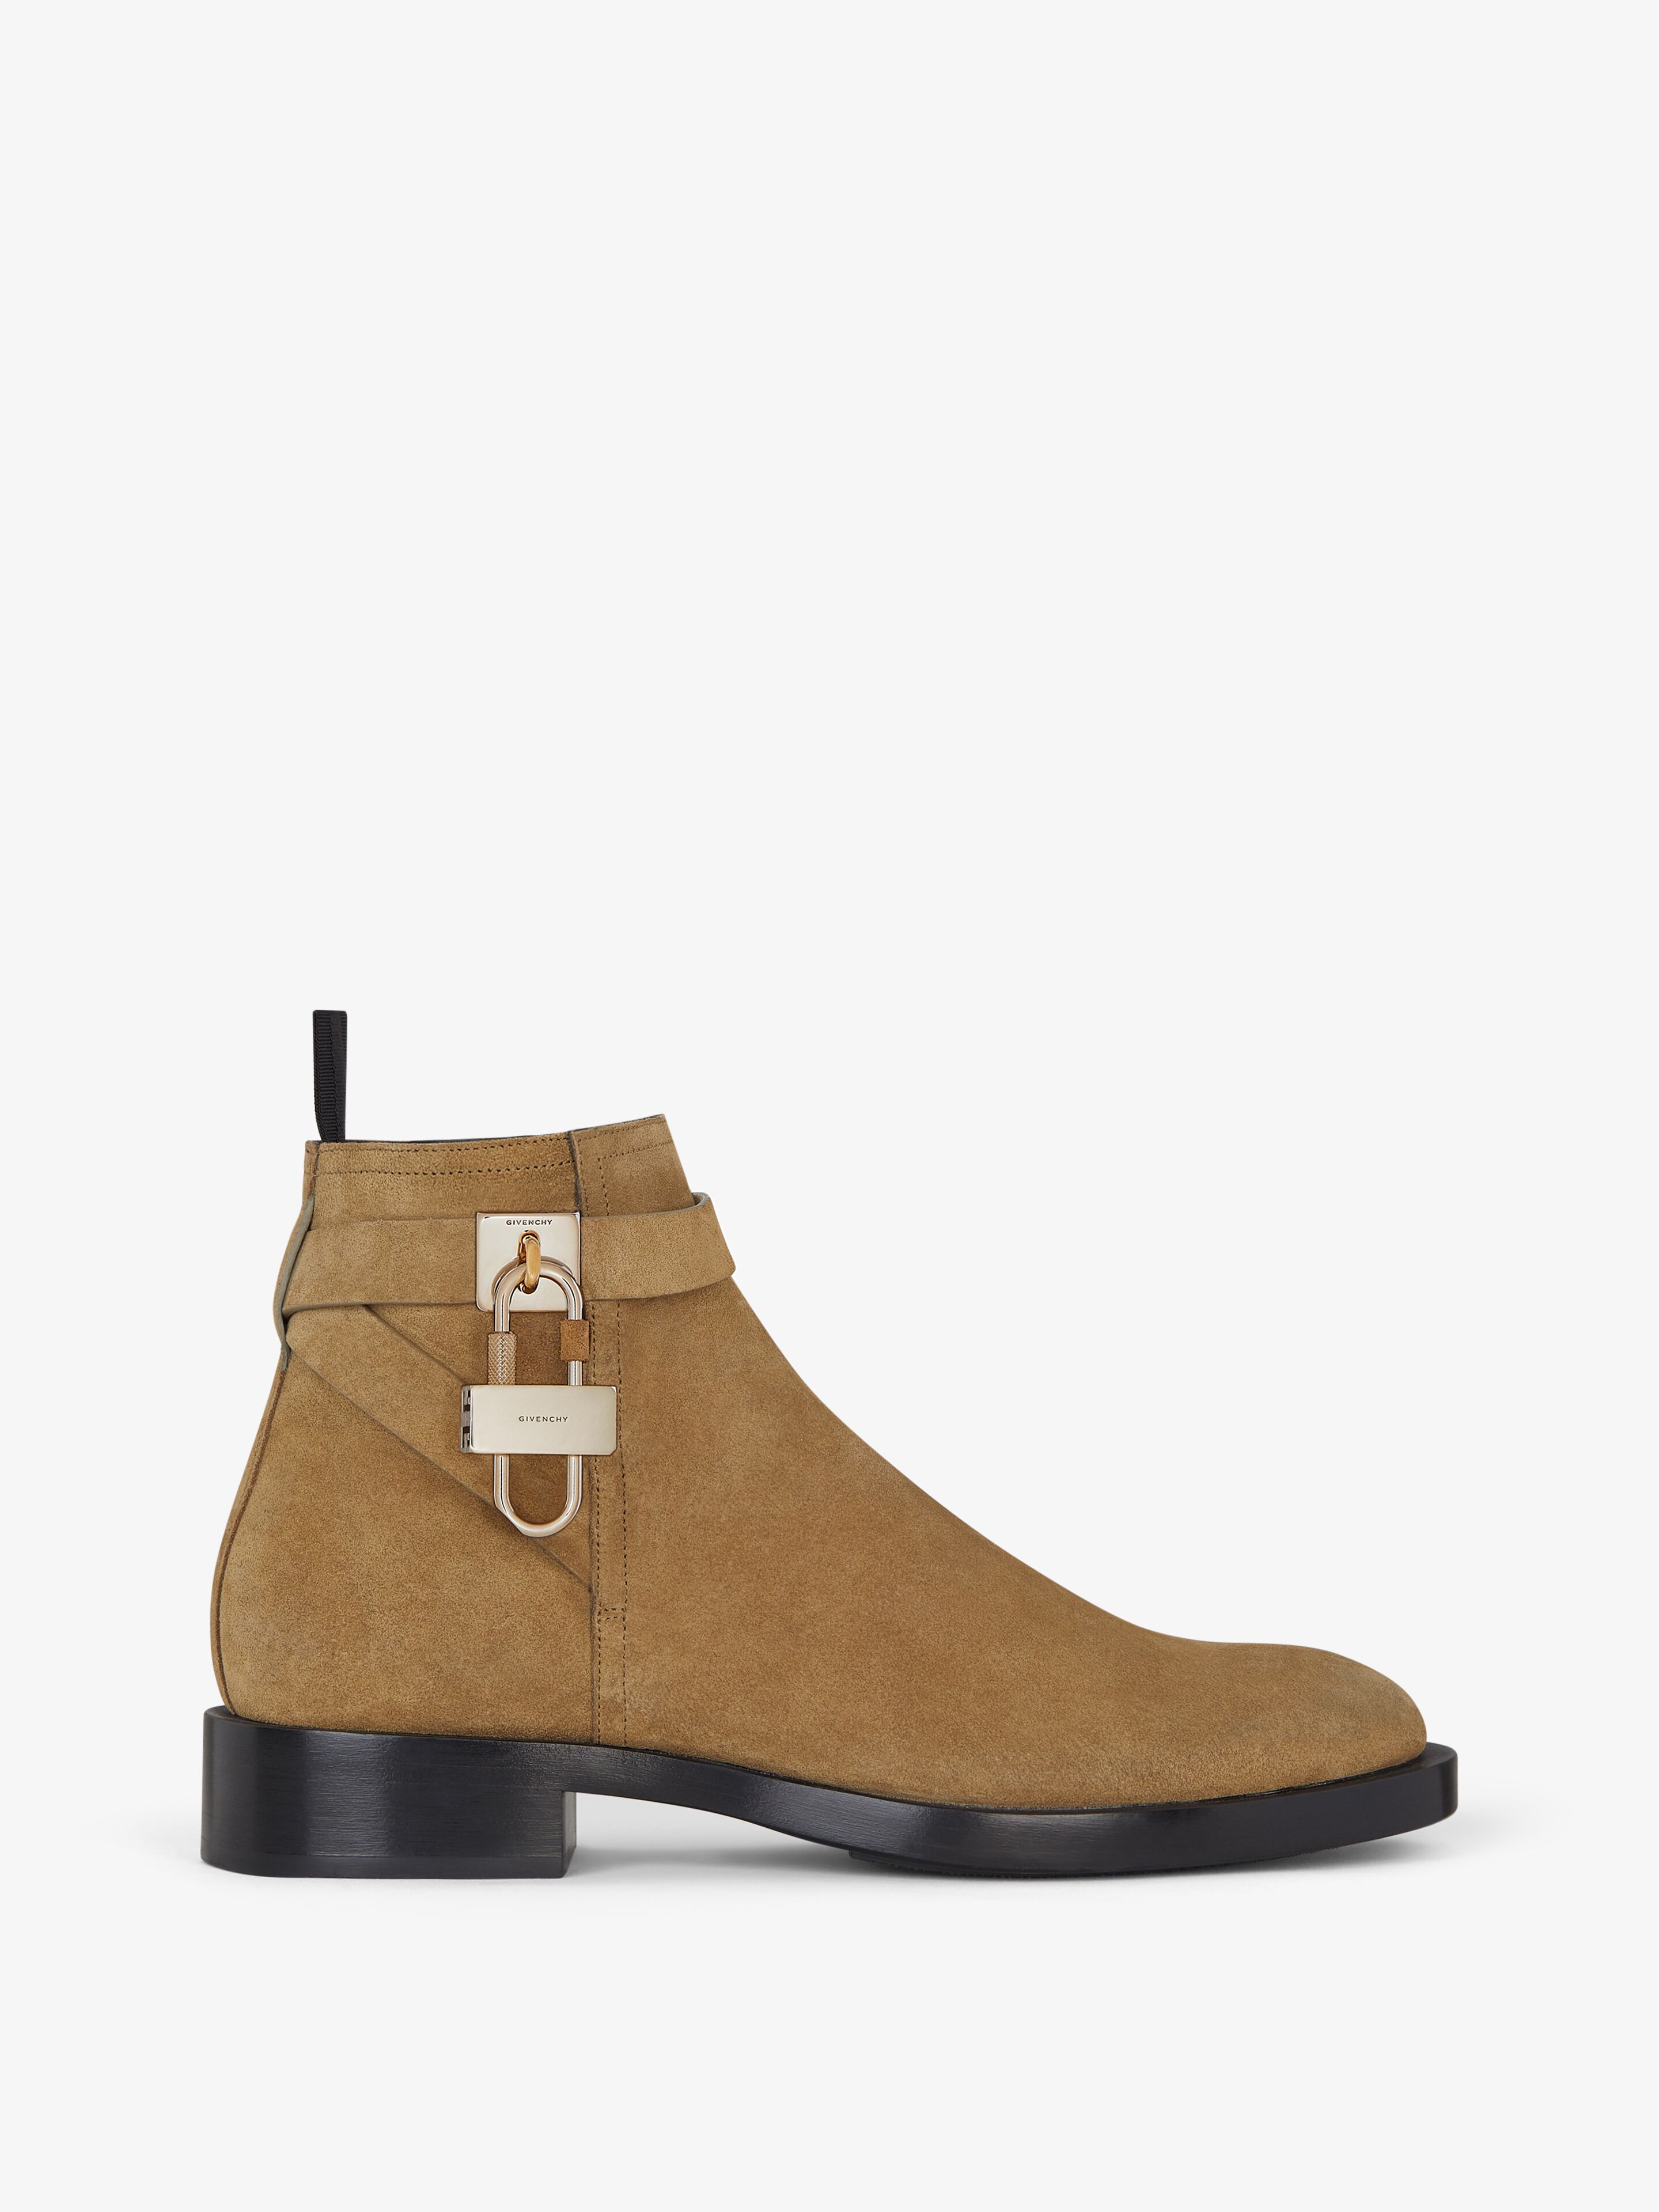 Givenchy Men's Lock Ankle Boots In Suede In Light Brown